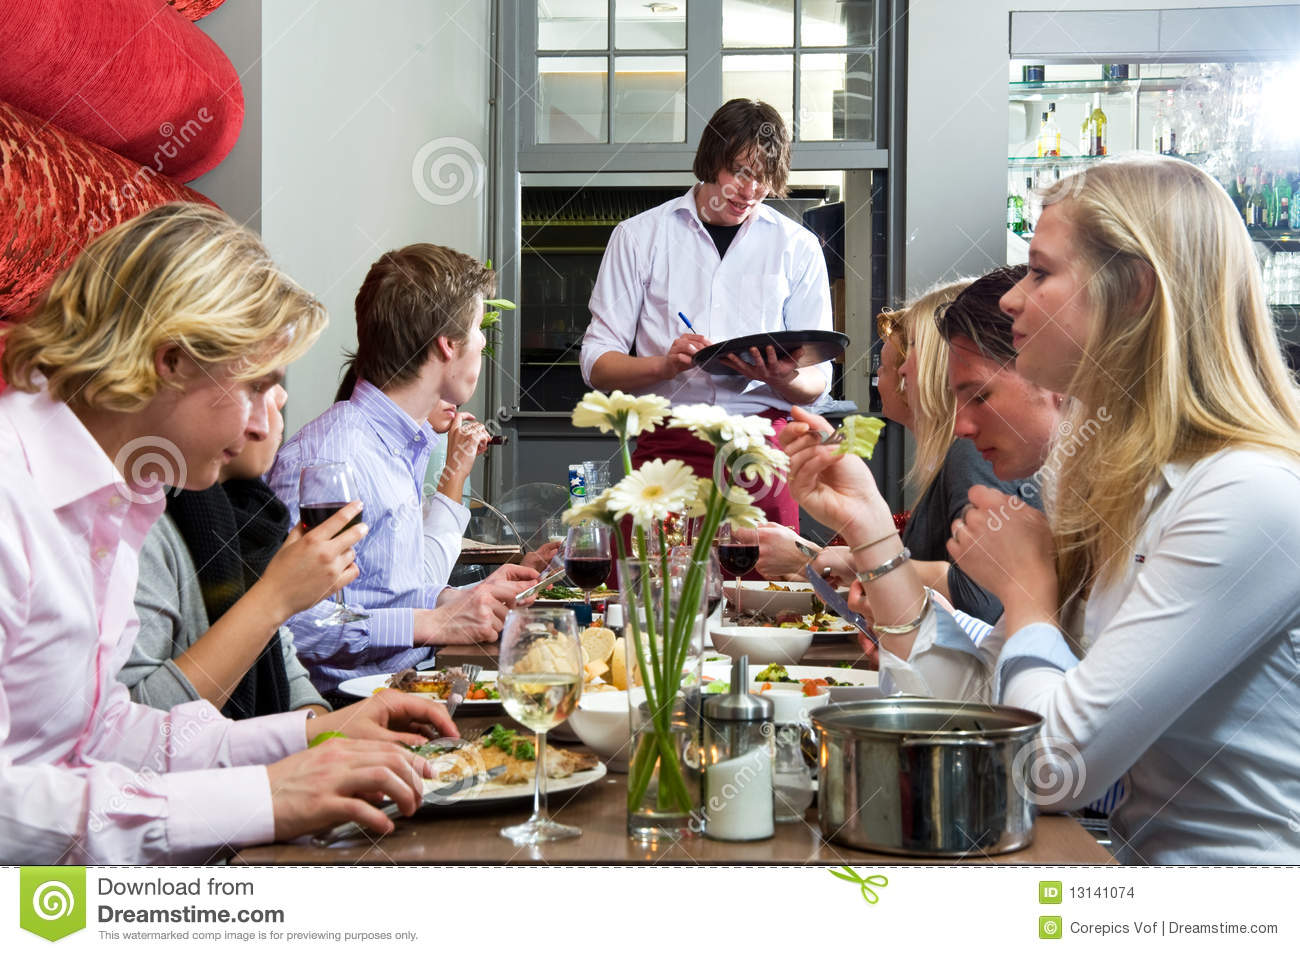 Waiter Taking Orders From A Group Of Dinner Guests At A Restaurant